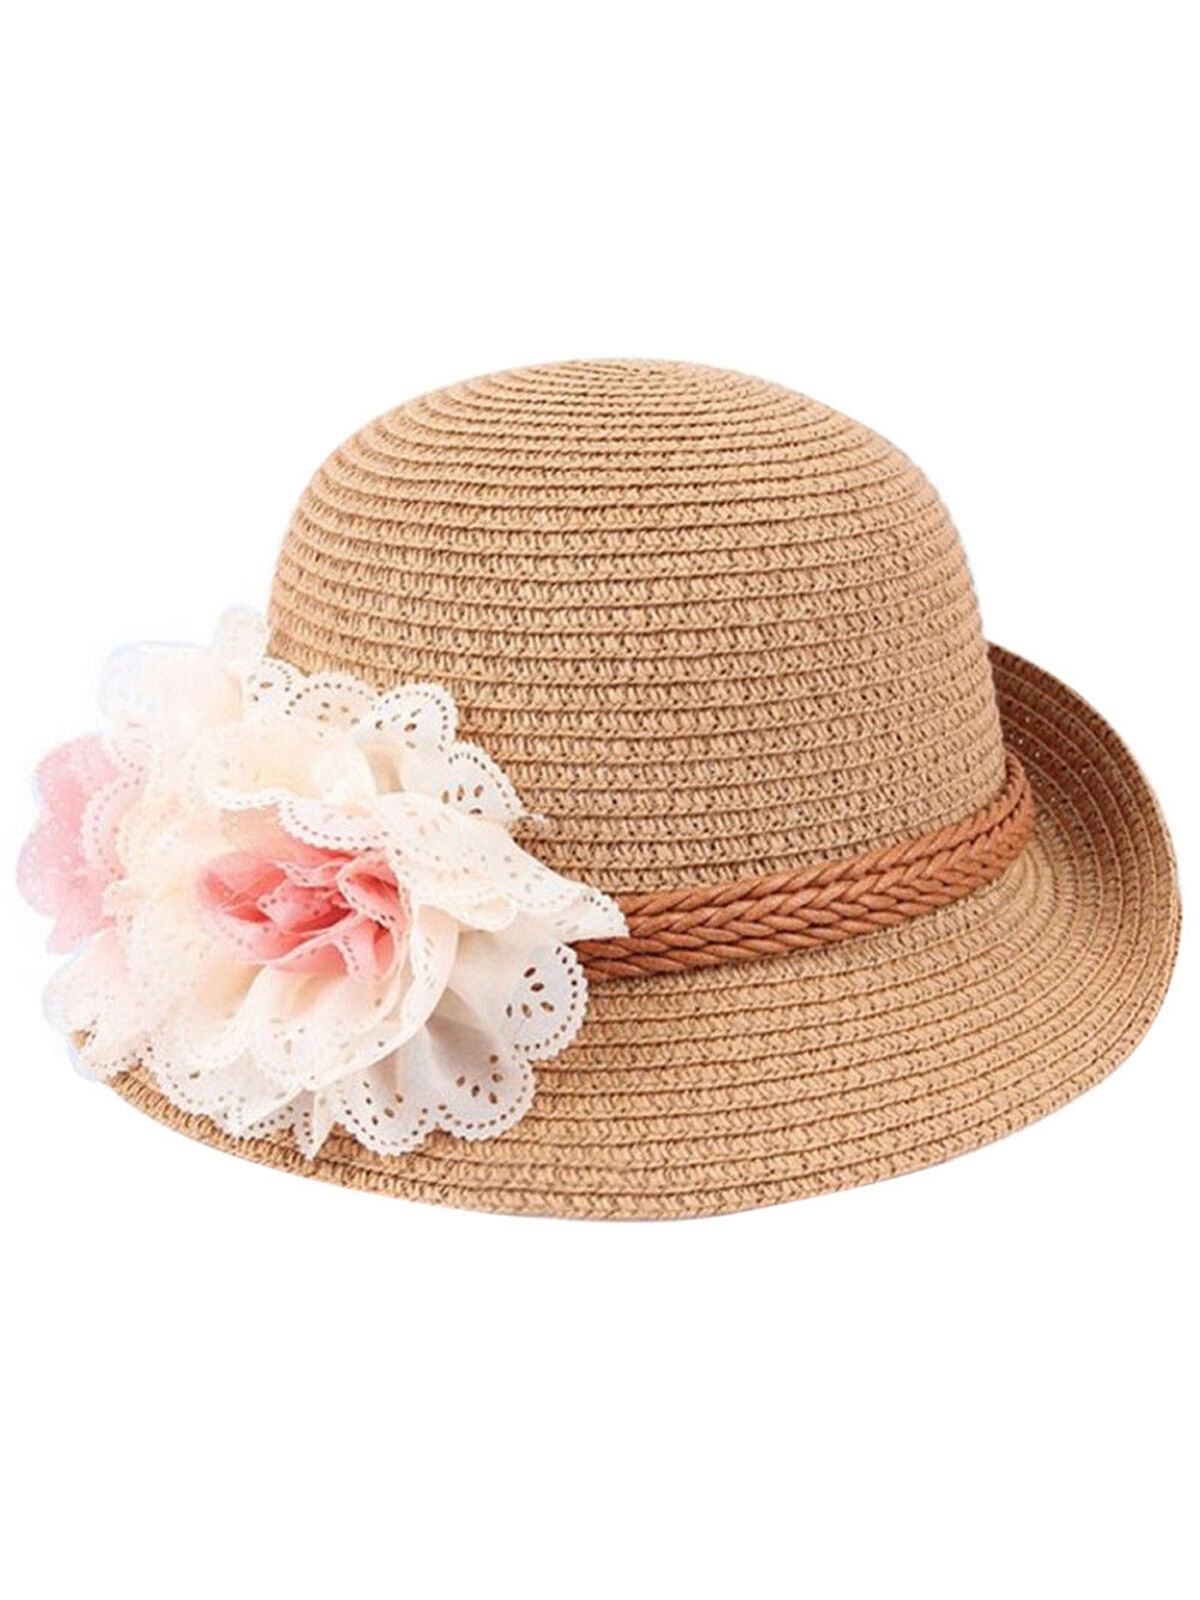 Toddler Baby Flower Decor Breathable Hat Straw Sun Hat Kids Hat Girls Hats - image 5 of 5